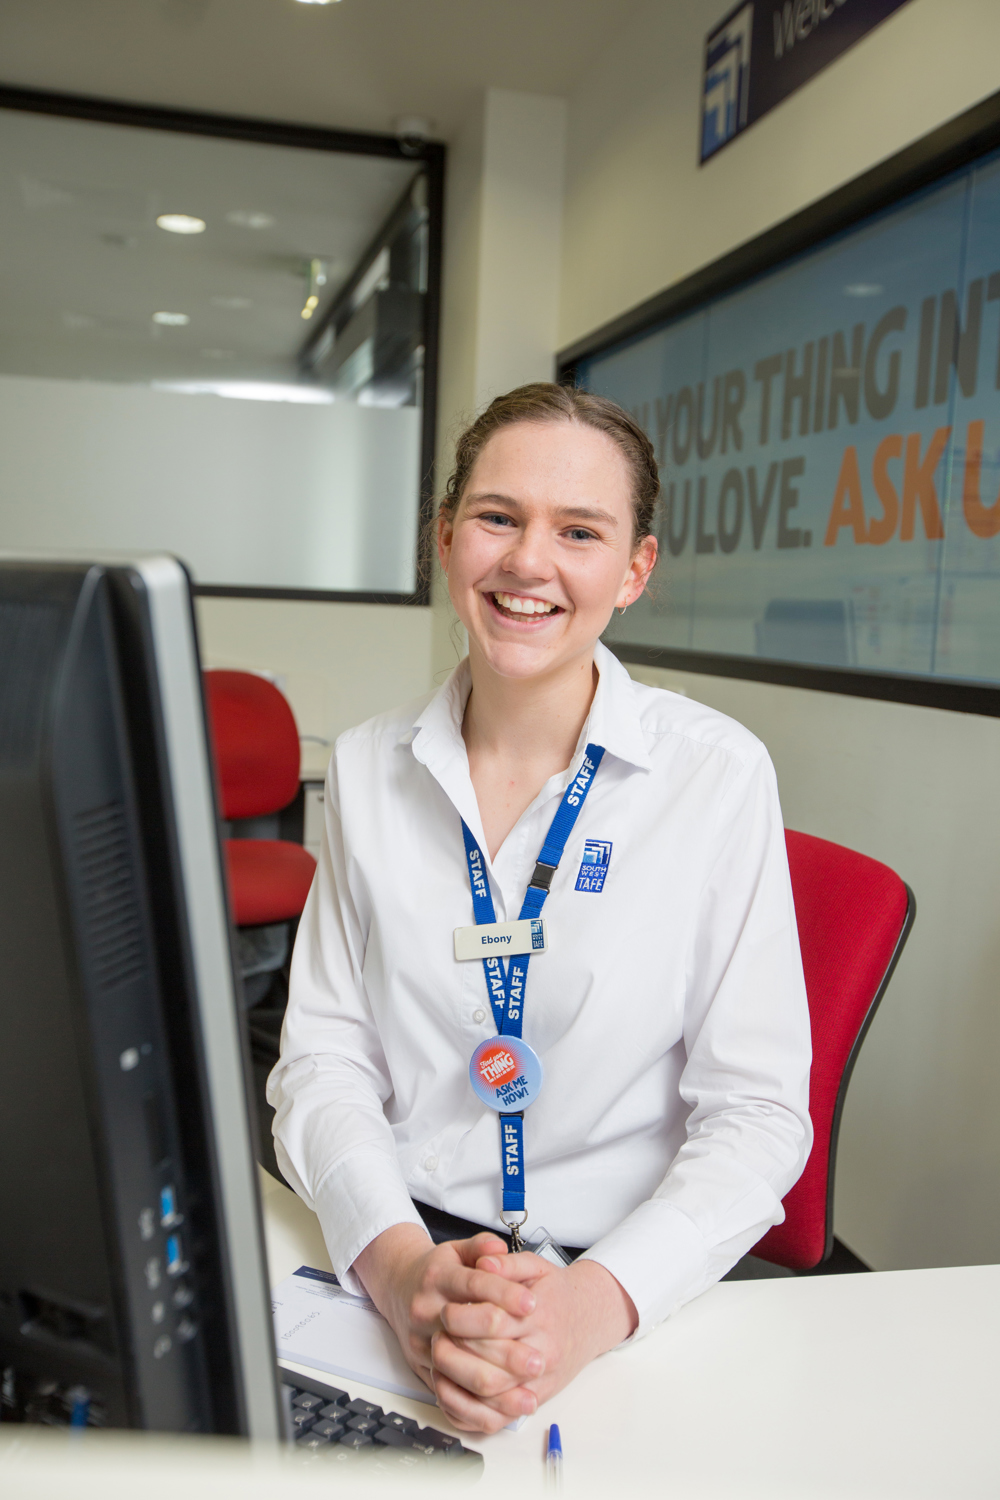 Ebony completed a Certificate III in Business traineeship as a customer service officer at South West TAFE before successfully gaining full-time employment earlier this year.